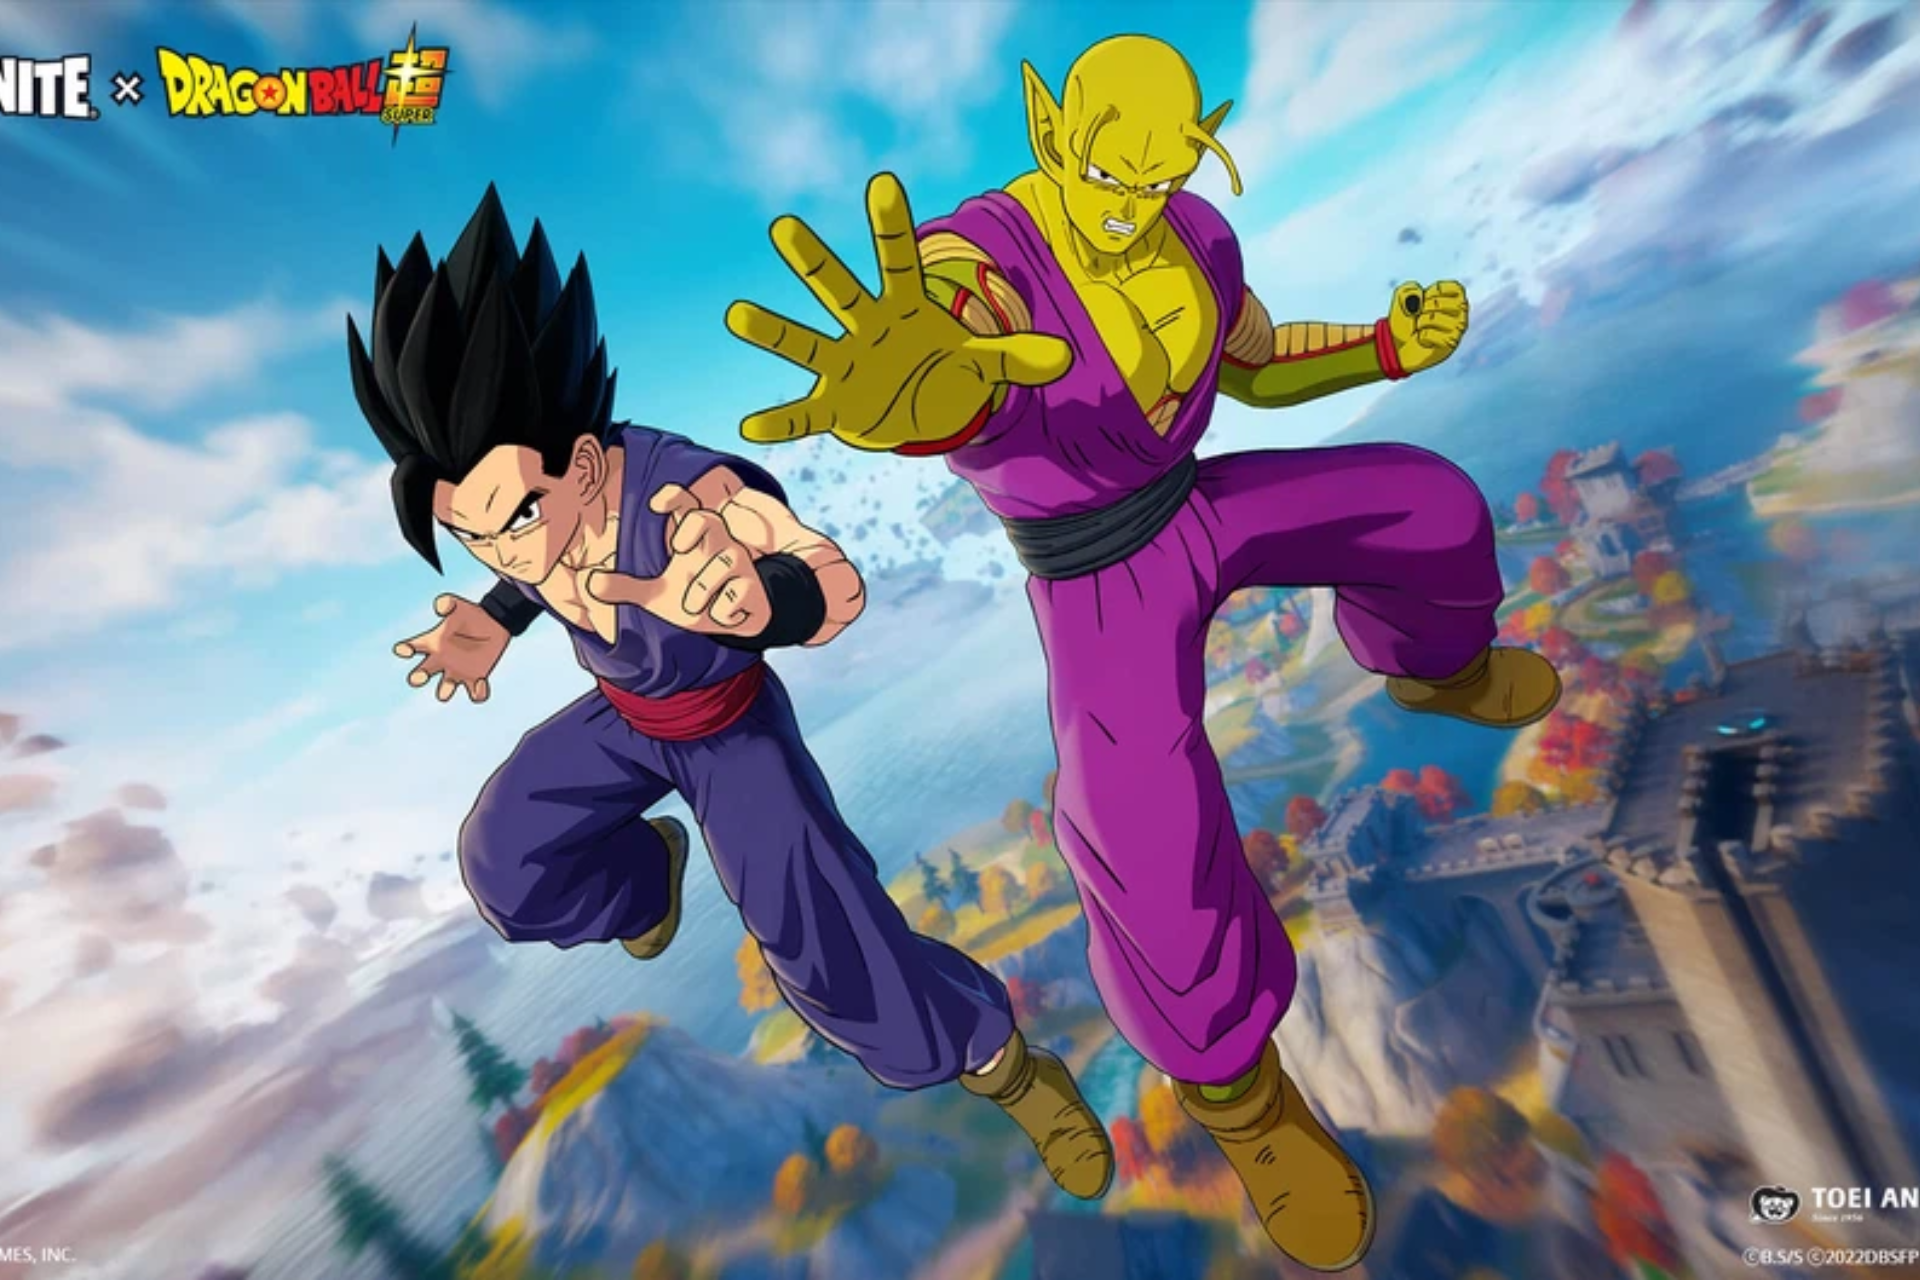 Dragon Ball Super Season 2 What to expect from the anime